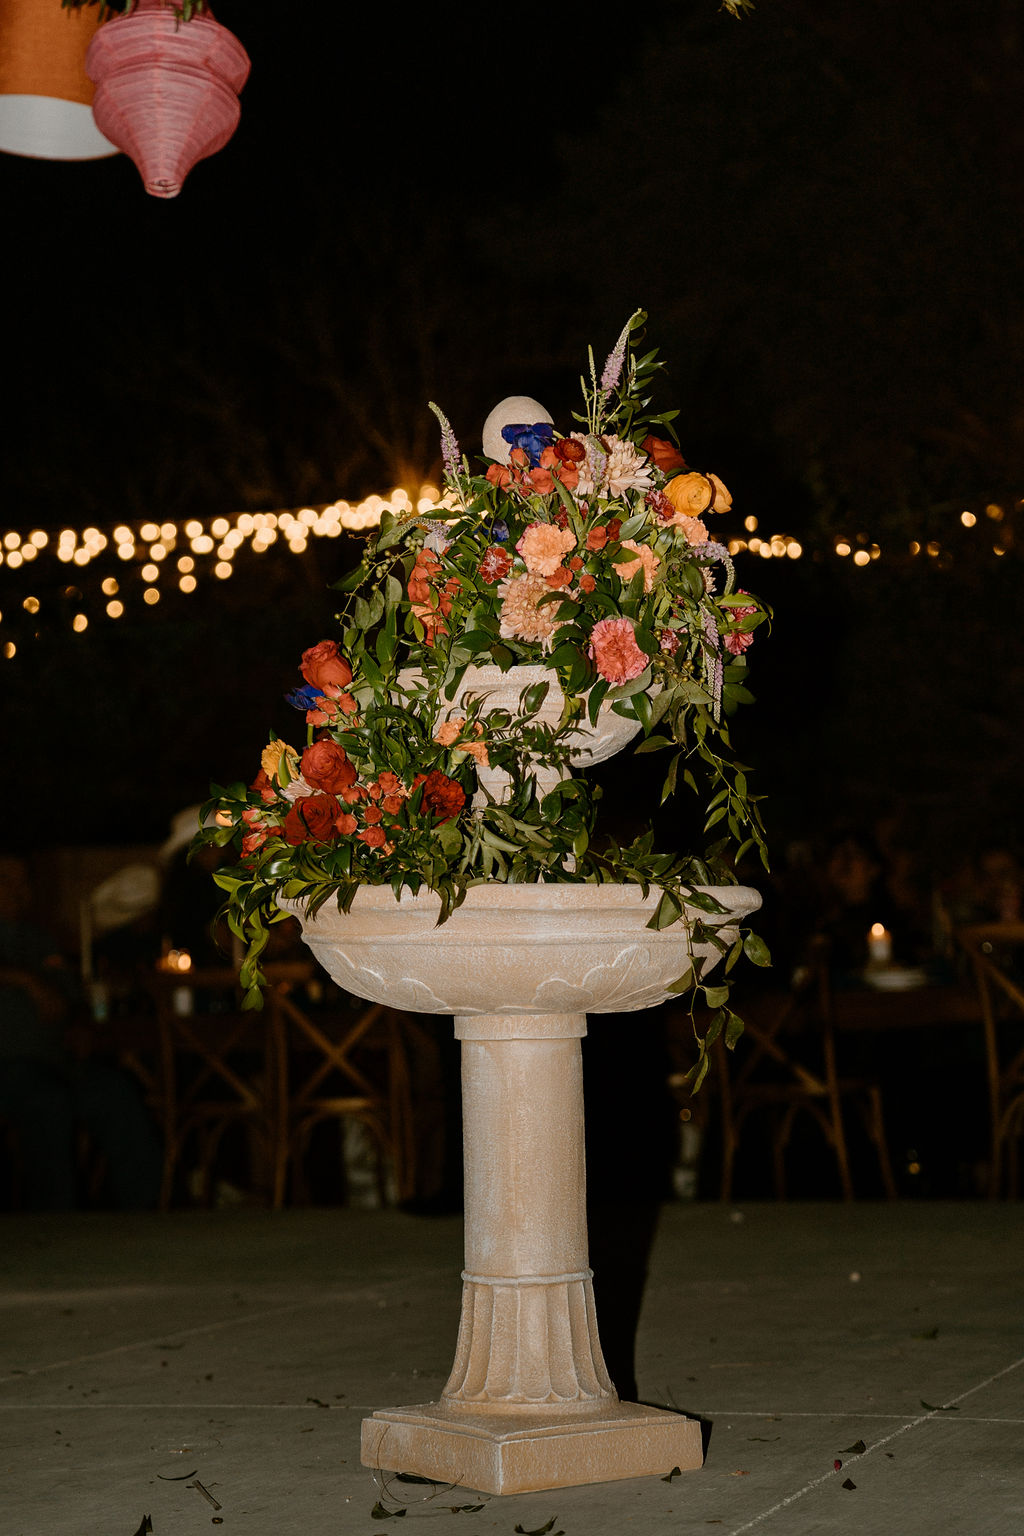 A floral arrangement in a stone pedestal vase, featuring orange and pink blooms with greenery, under evening lights at an outdoor event.